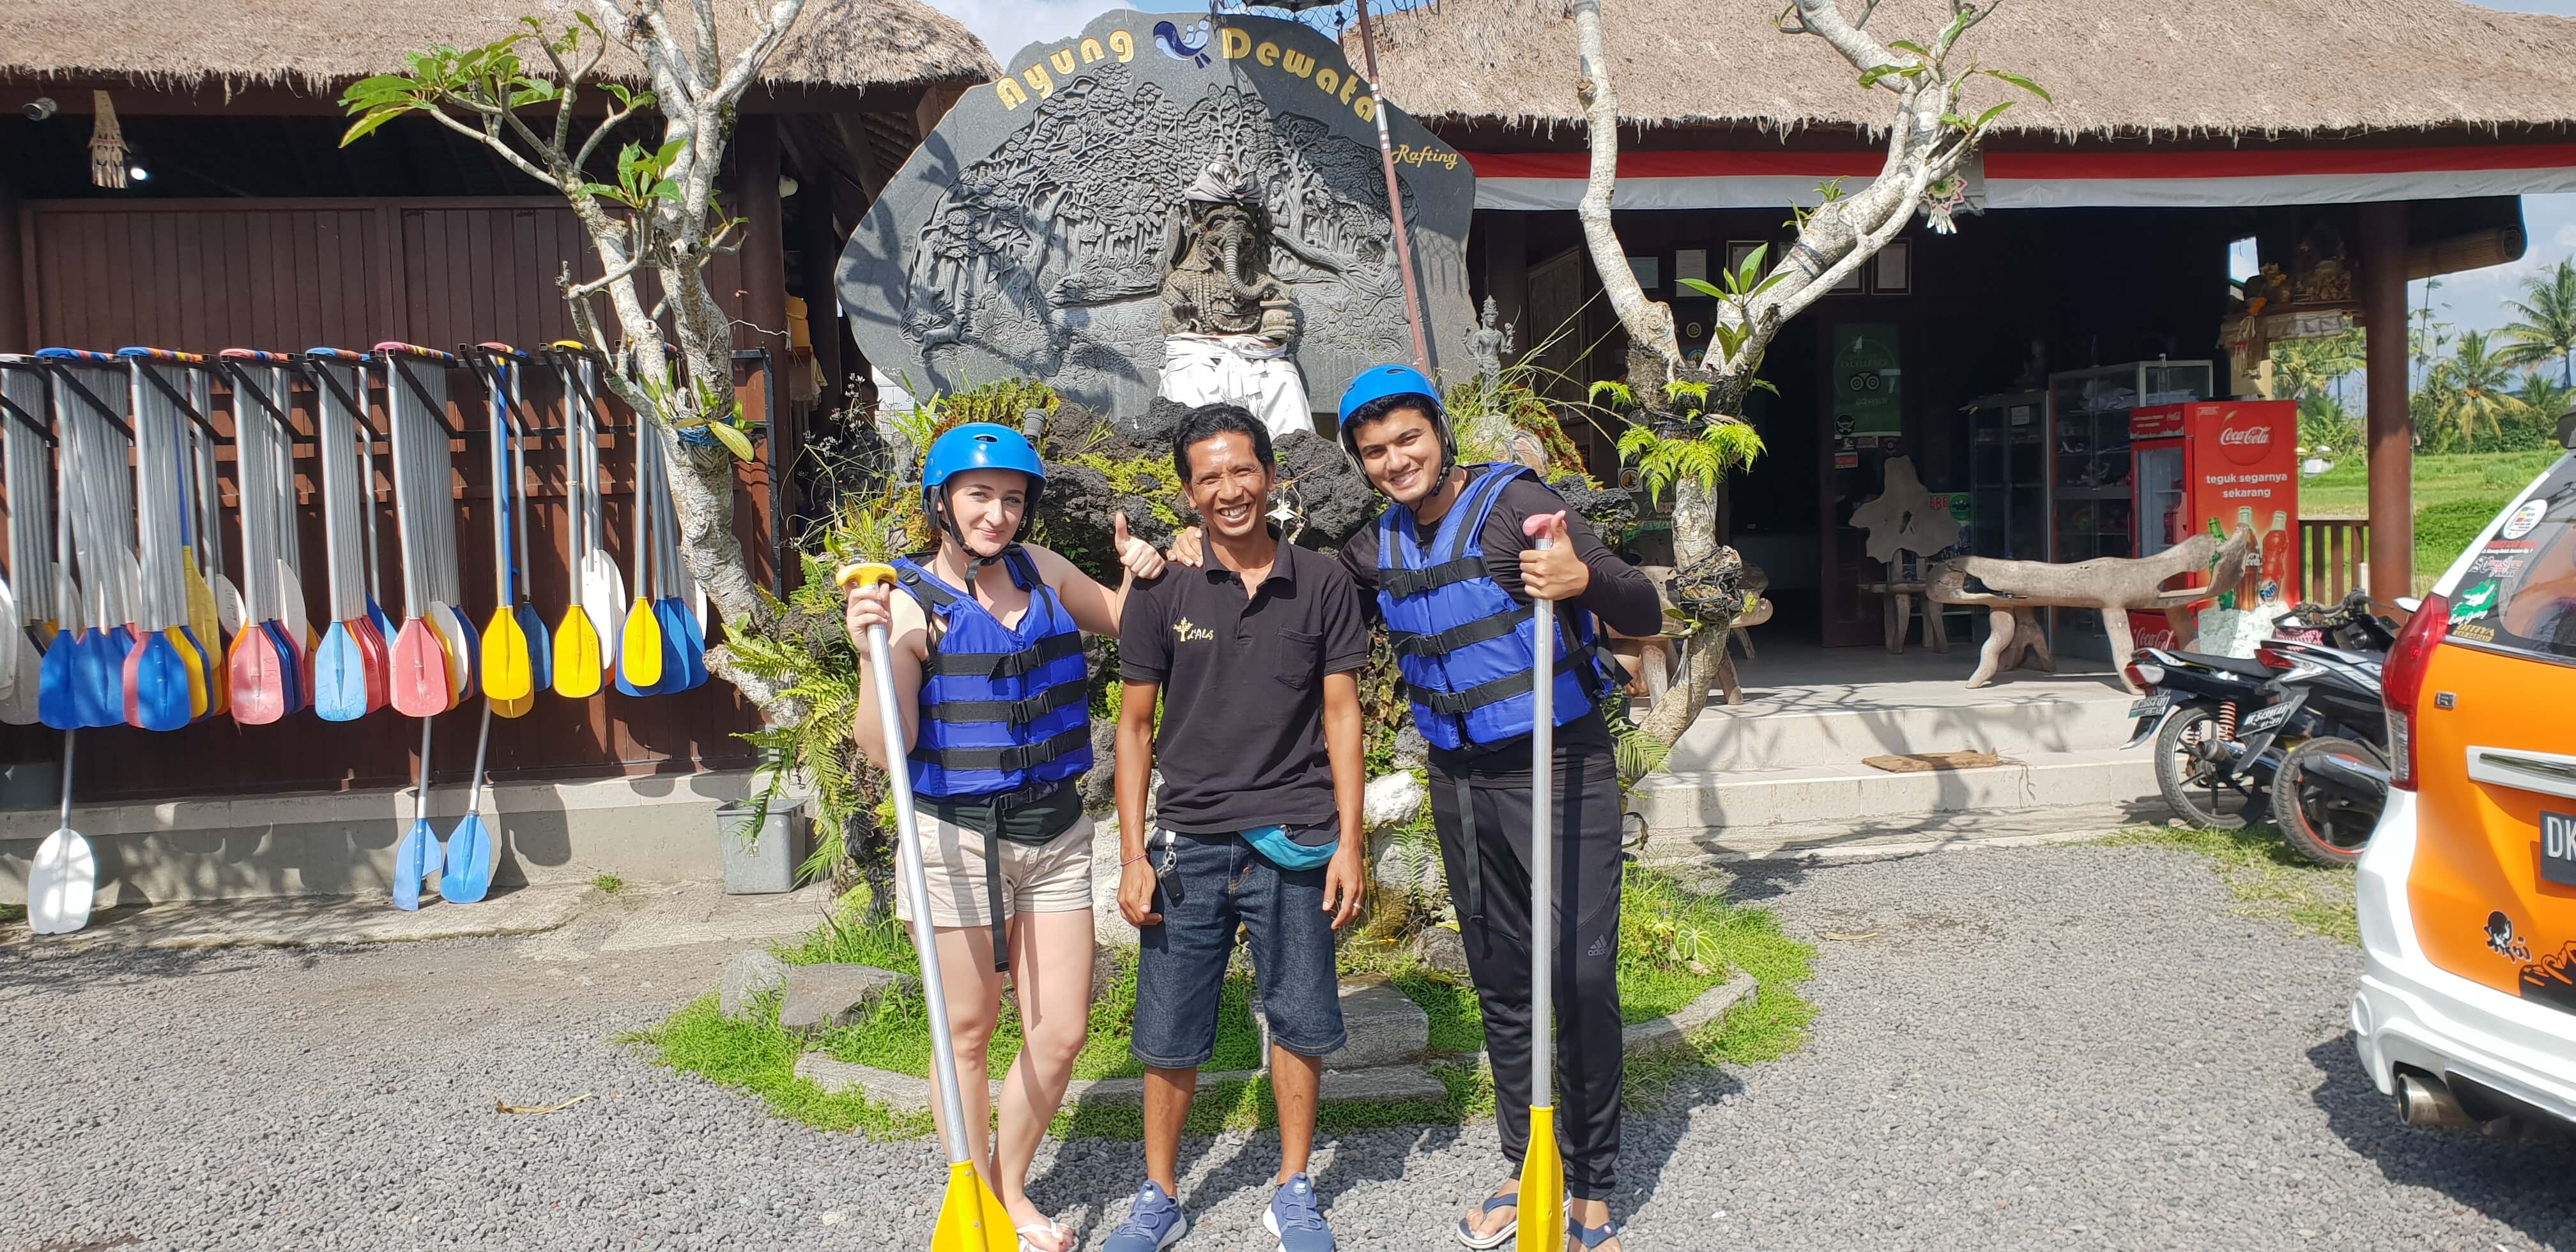 Our Ubud itinerary began on an action packed note as we went river rafting in Ayung river as soon as we stepped into Ubud